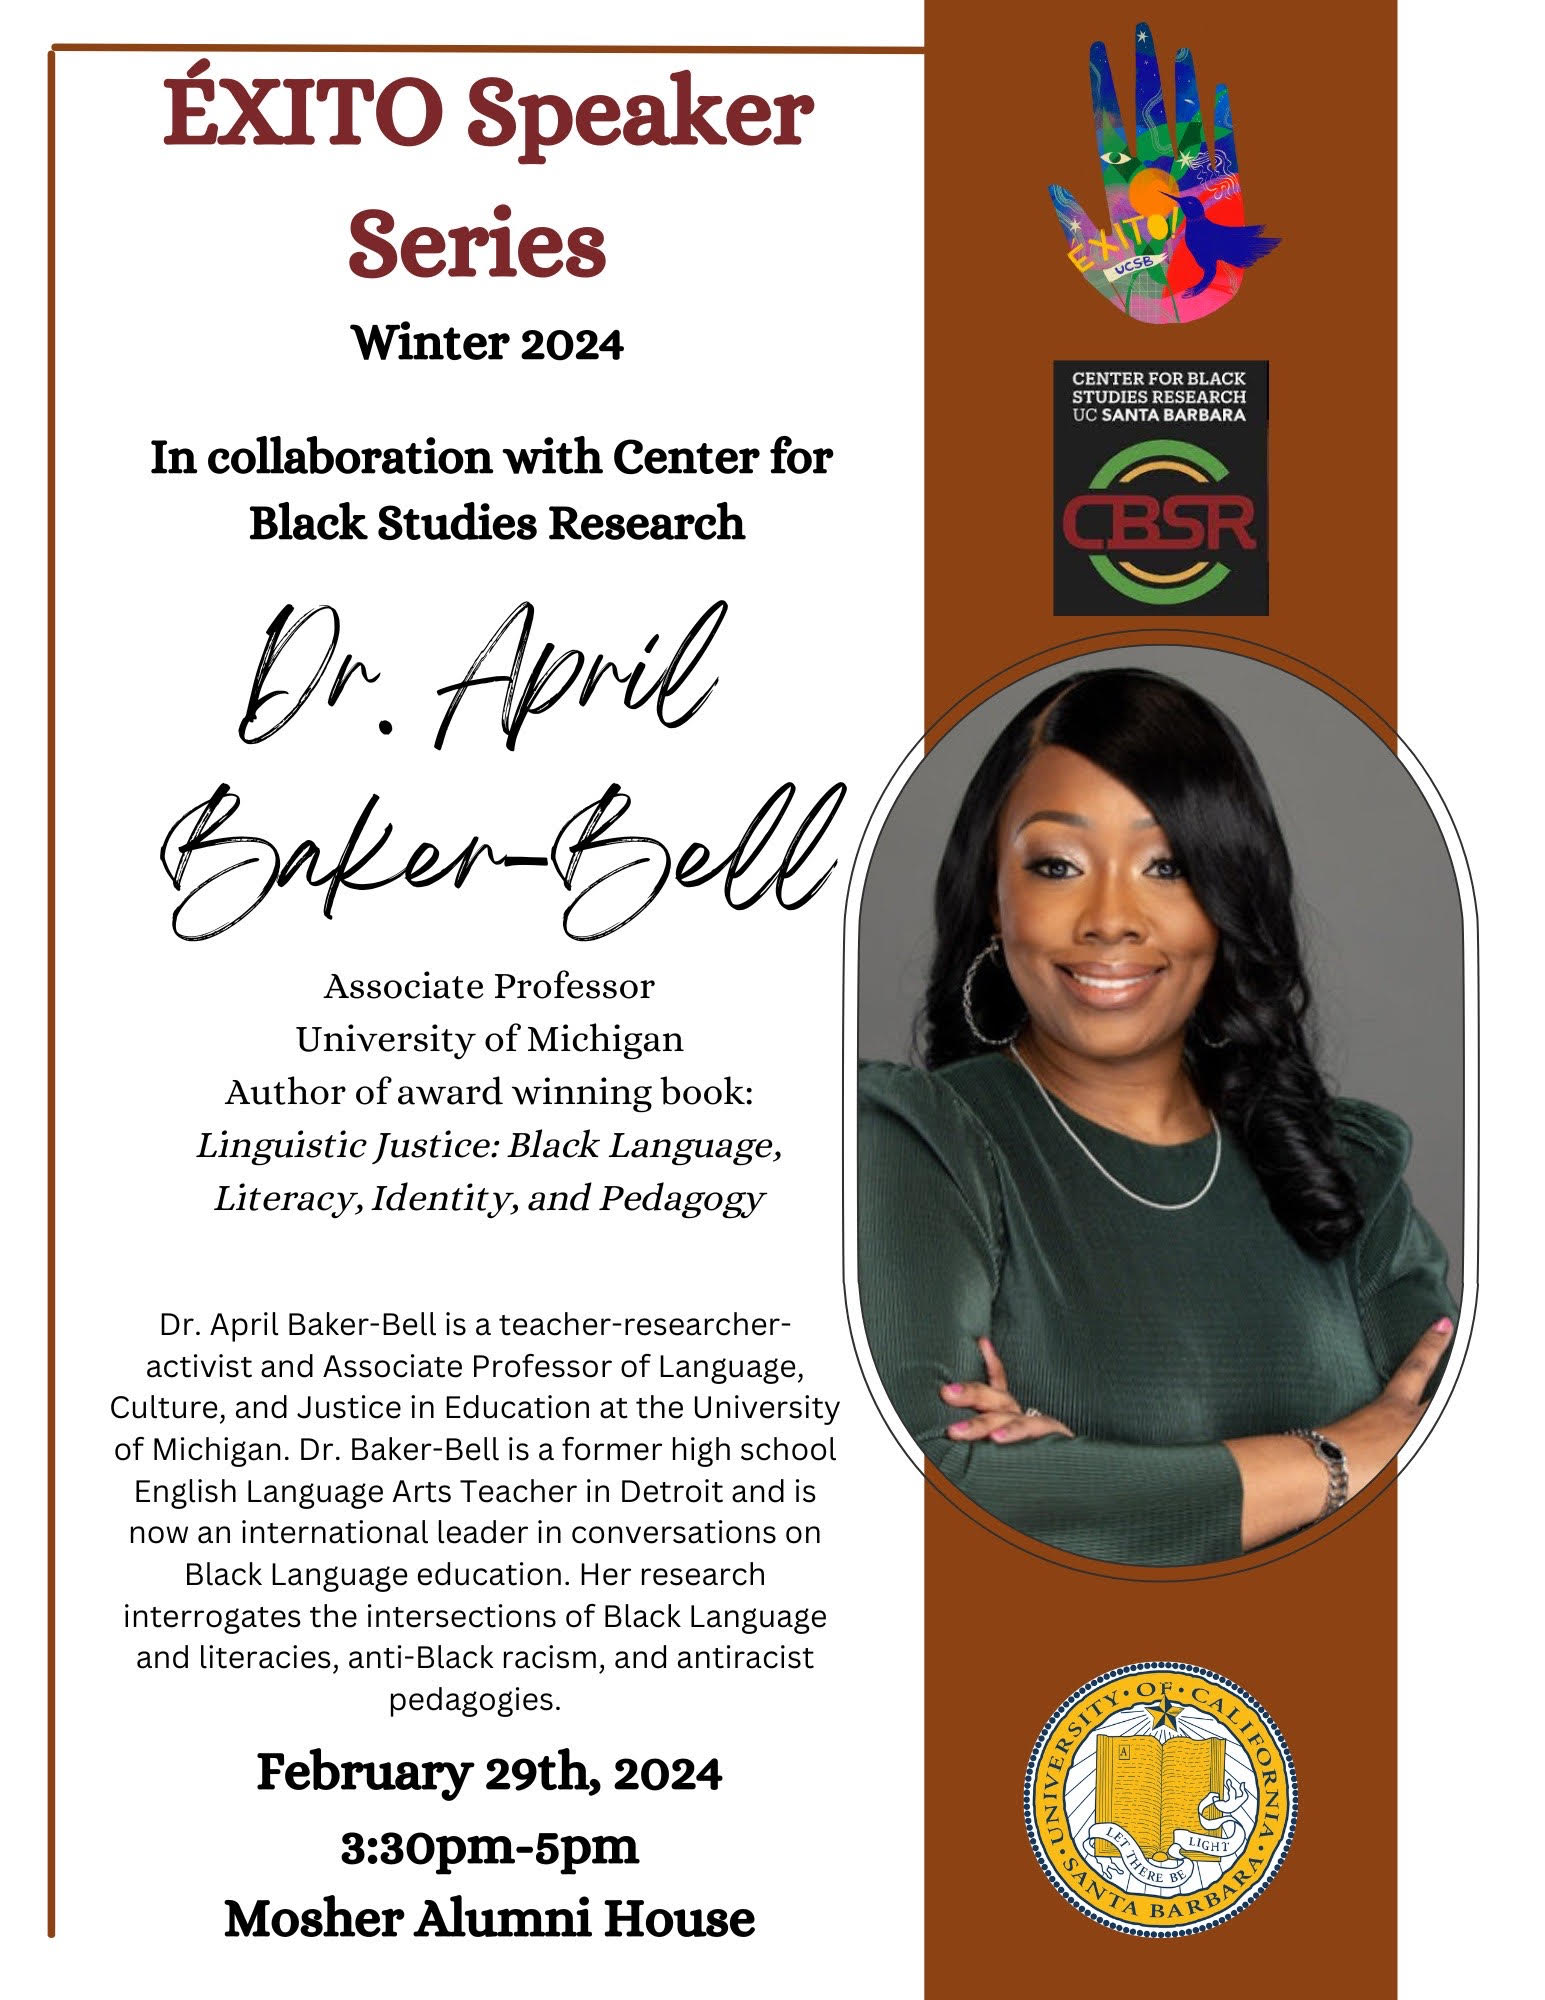 Flyer displaying information for Dr. Baker-Bell's event with EXITO